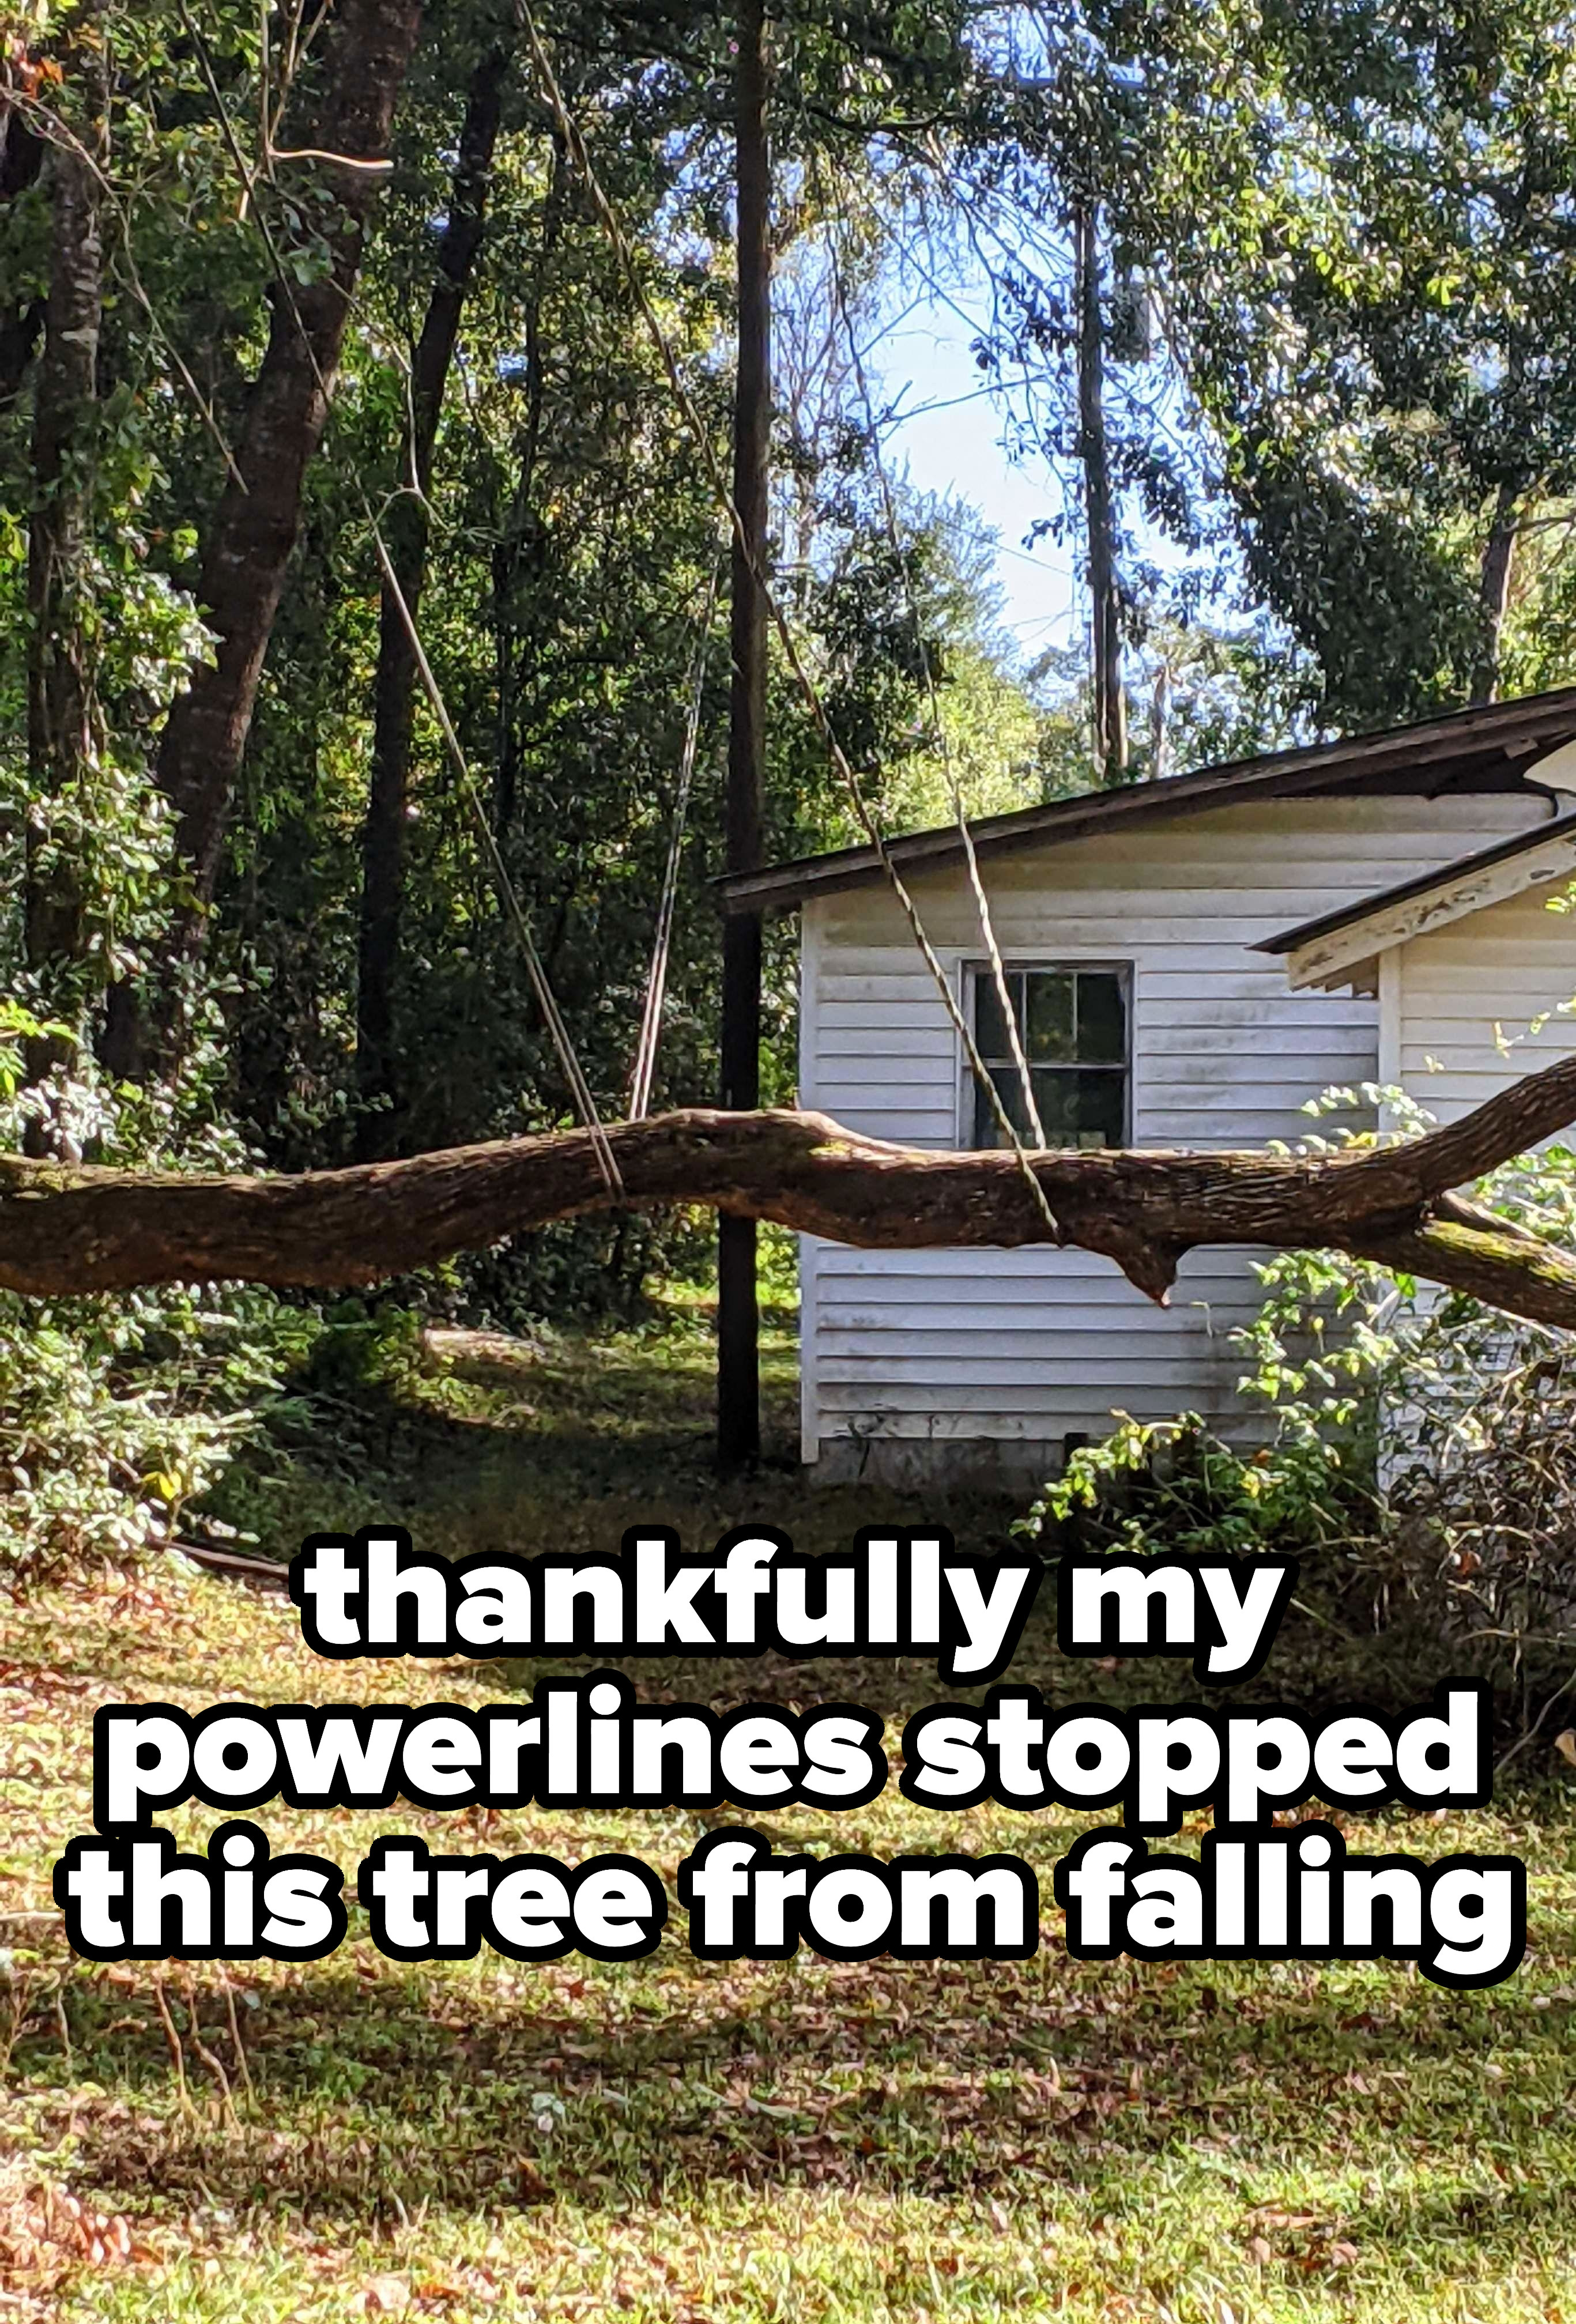 A fallen tree held up only by two power lines